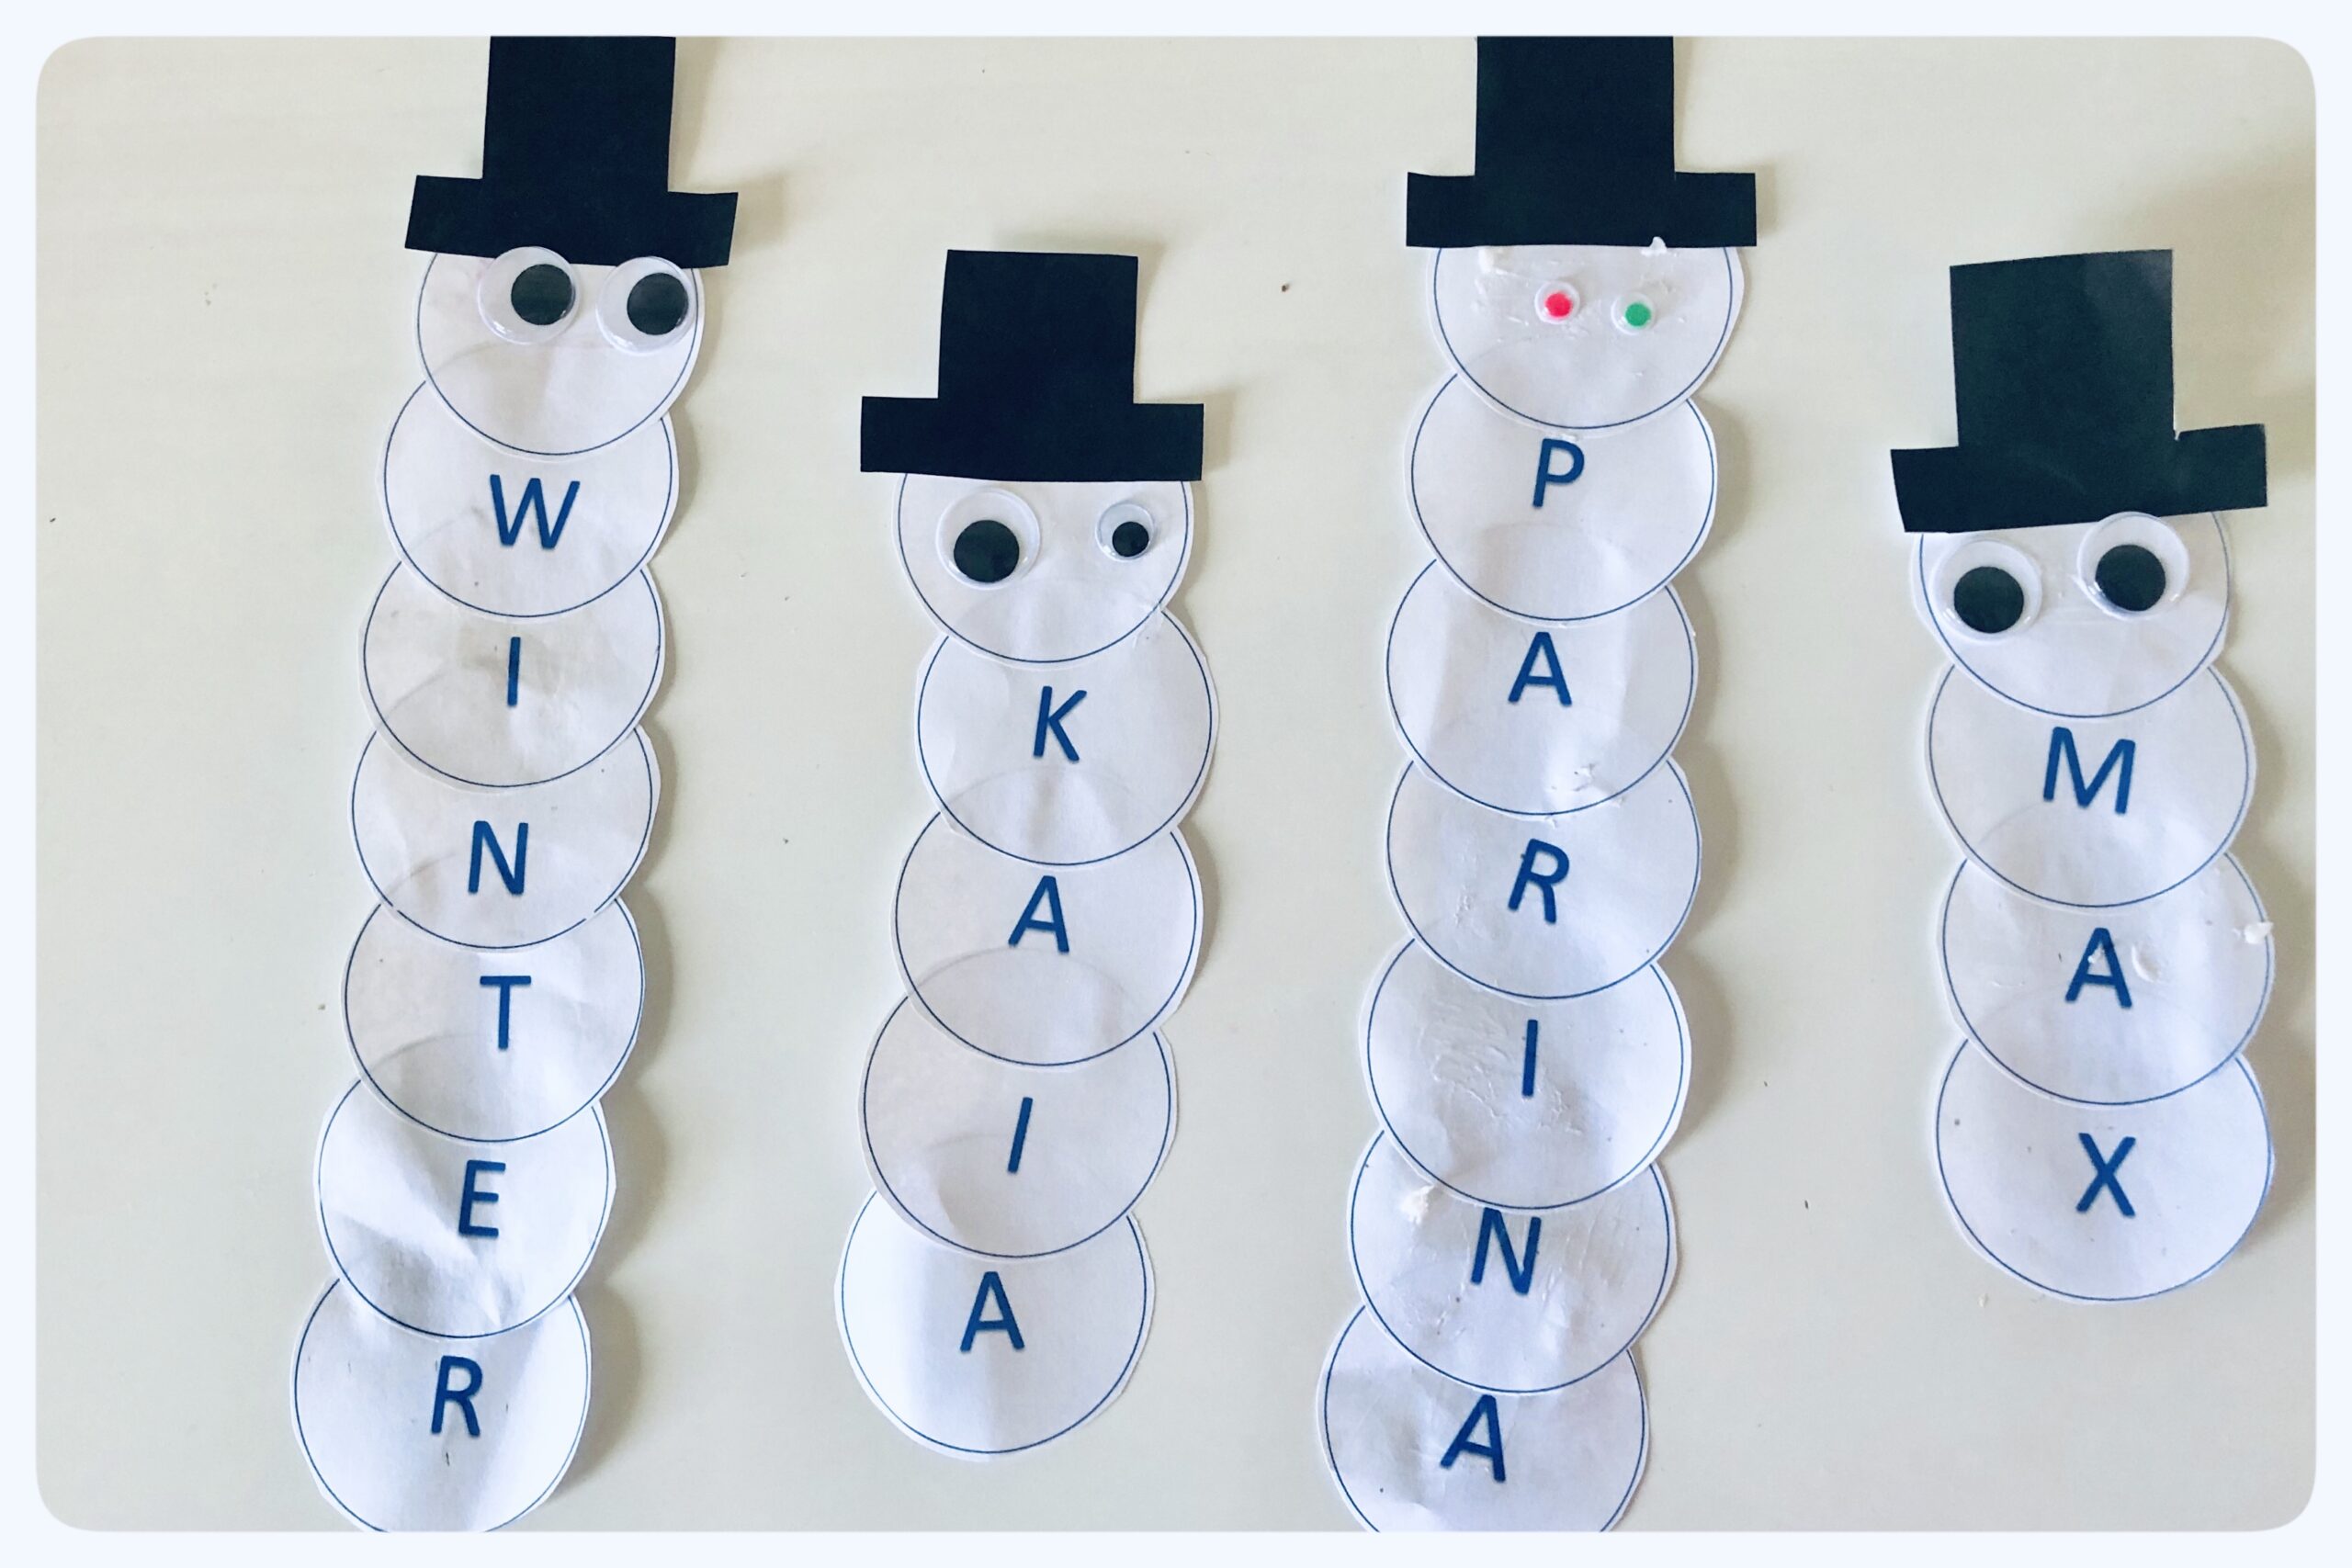 We’re ready for winter now with our Snowmen! This fun activity is great for letter recognition & fine motor skill development. 👉🏼 swipe to see how we set this up. ⛄️ Each child had the circles with letters of their name, plus one blank circle, and one black top hat. We talked about the first letter of everyone’s name and each child picked their letter out. With some help, they glued their letters together and added the top hat. Then the fun of choosing which wiggly eyes to put on 👀 They were So proud. Just look at their sweet faces! 🥰
